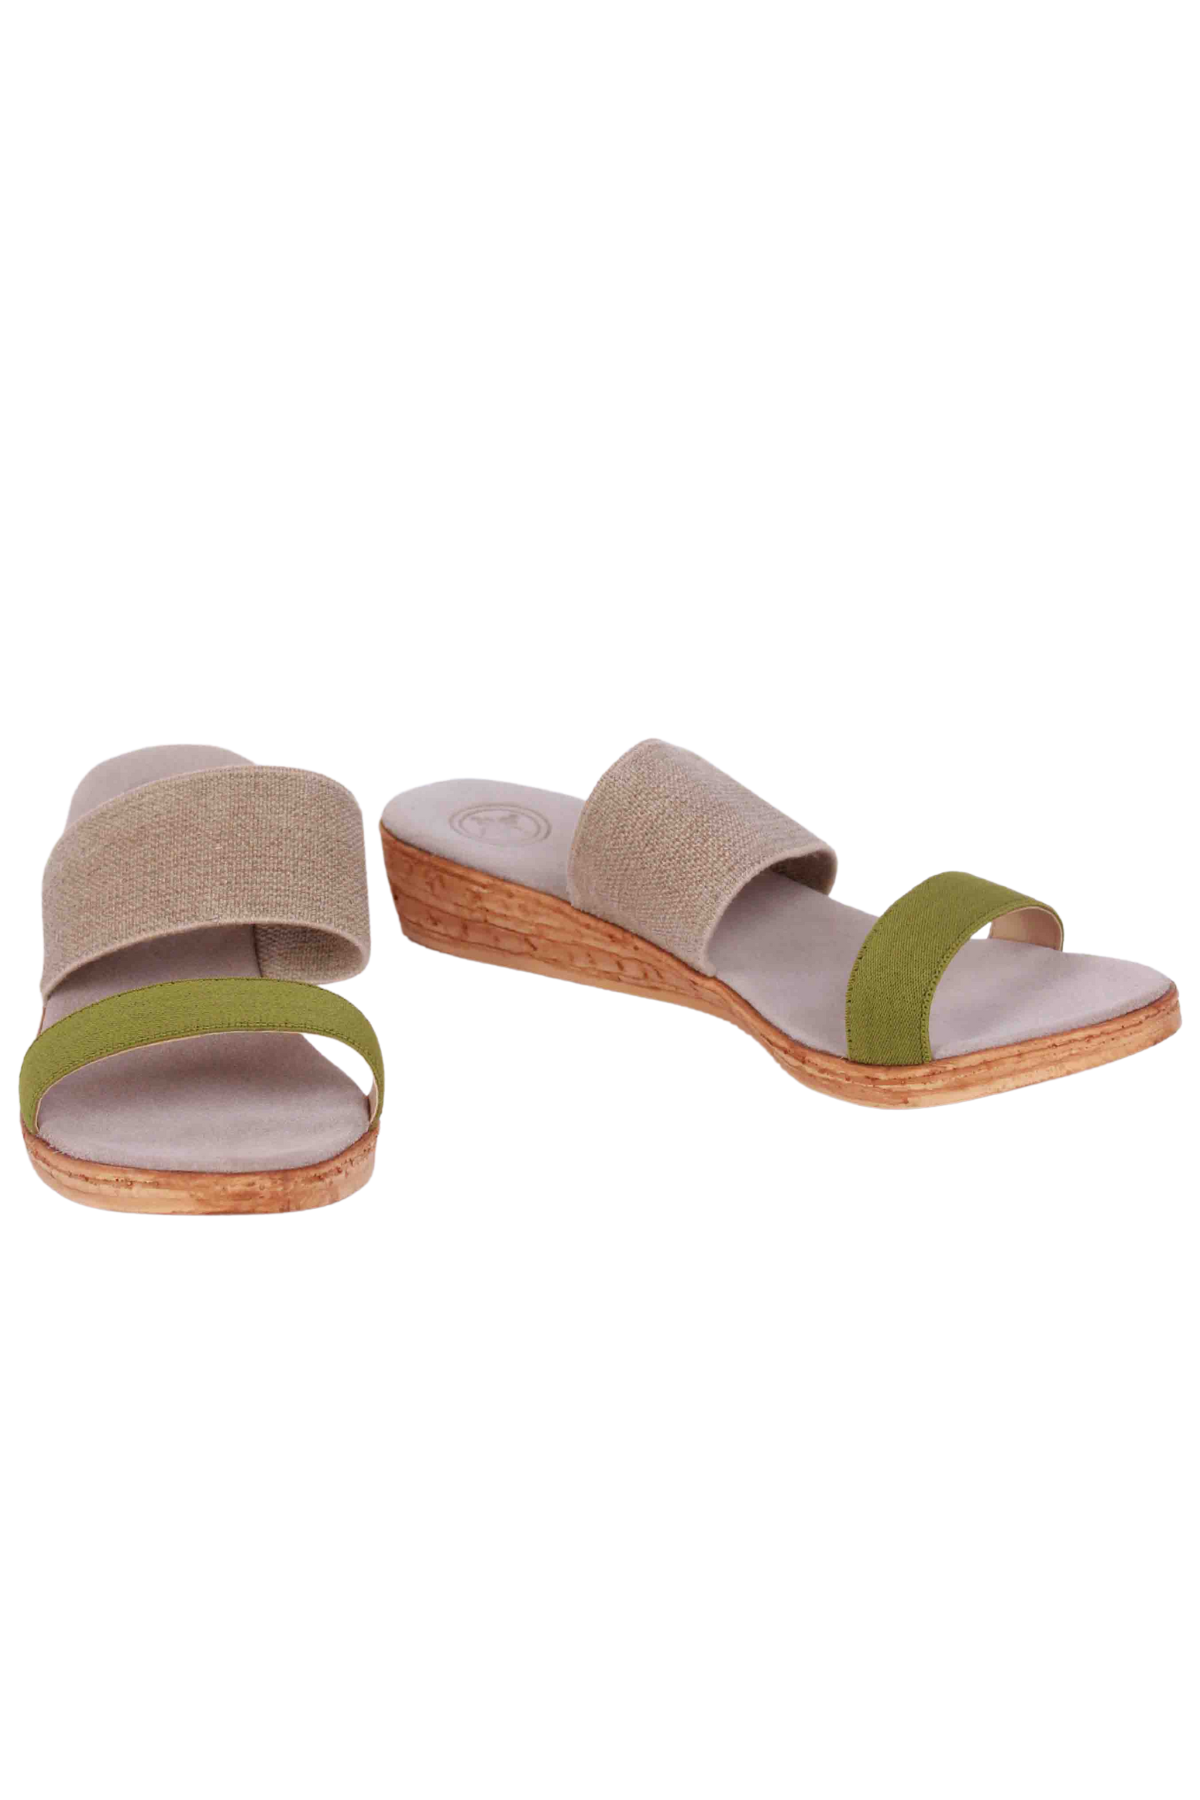 side view of Olive and Linen Cecilia Sandal by Charleston Shoe Company